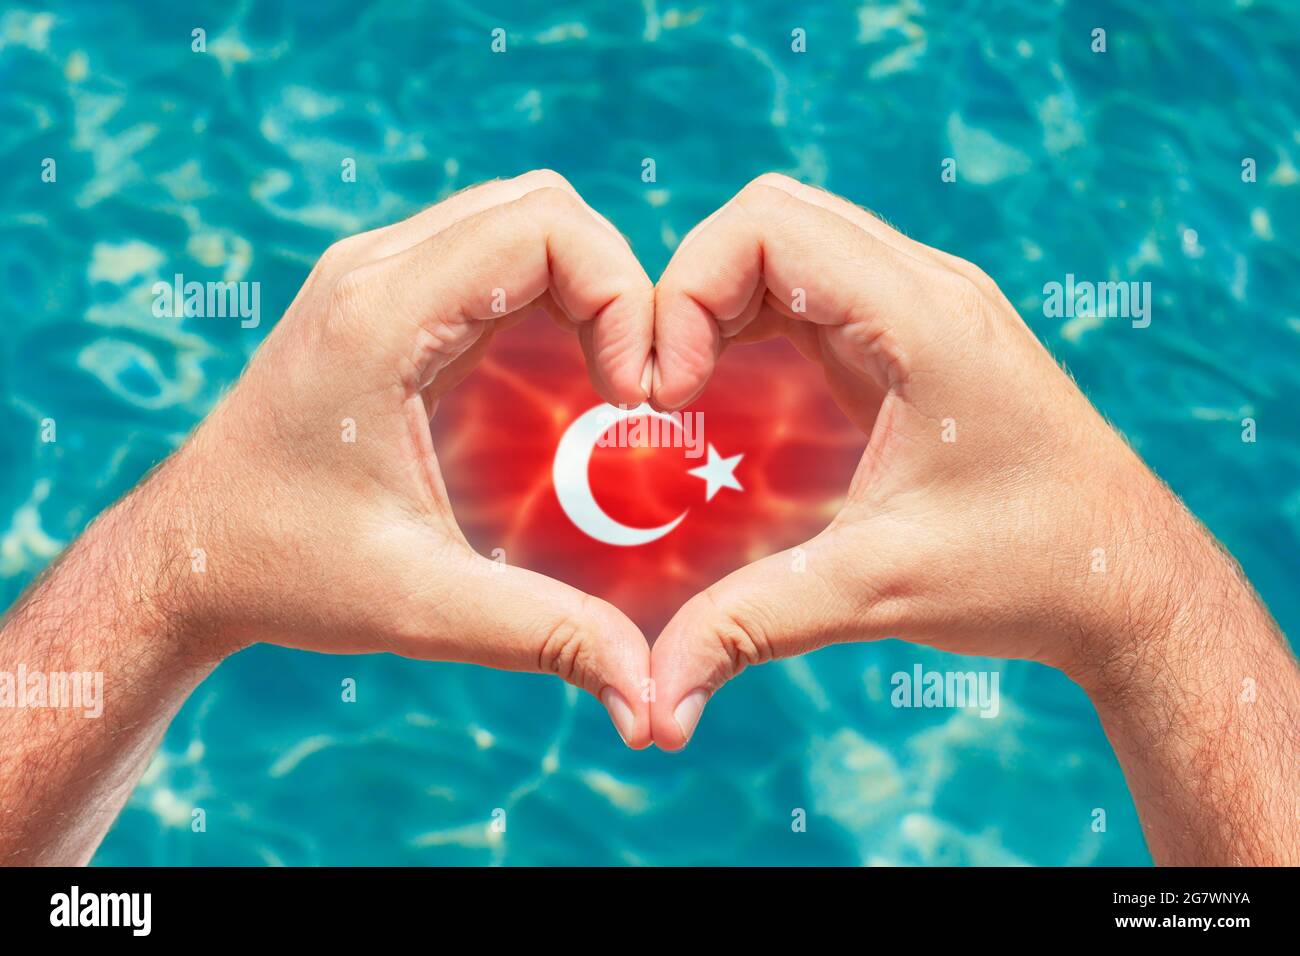 Summer vacation in Turkey concept. Male hands making heart shape with Turkey flag inside. Beautiful crystal clear turquoise water with caustics. Stock Photo